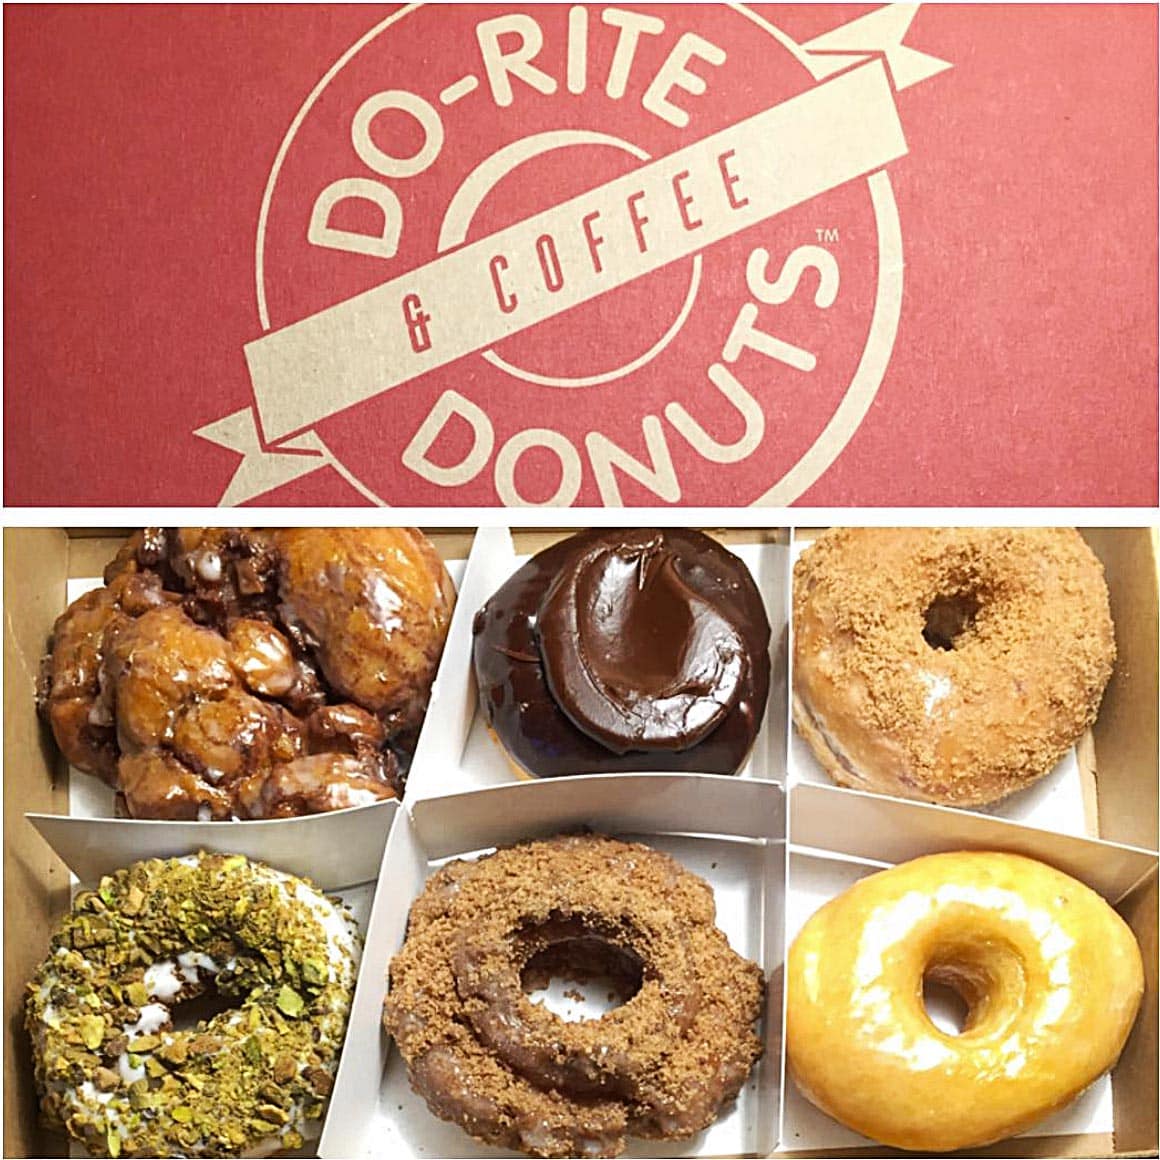 You should eat lots of donuts and some of them should be from these 3 Must Visit Donut Shops in the U.S.